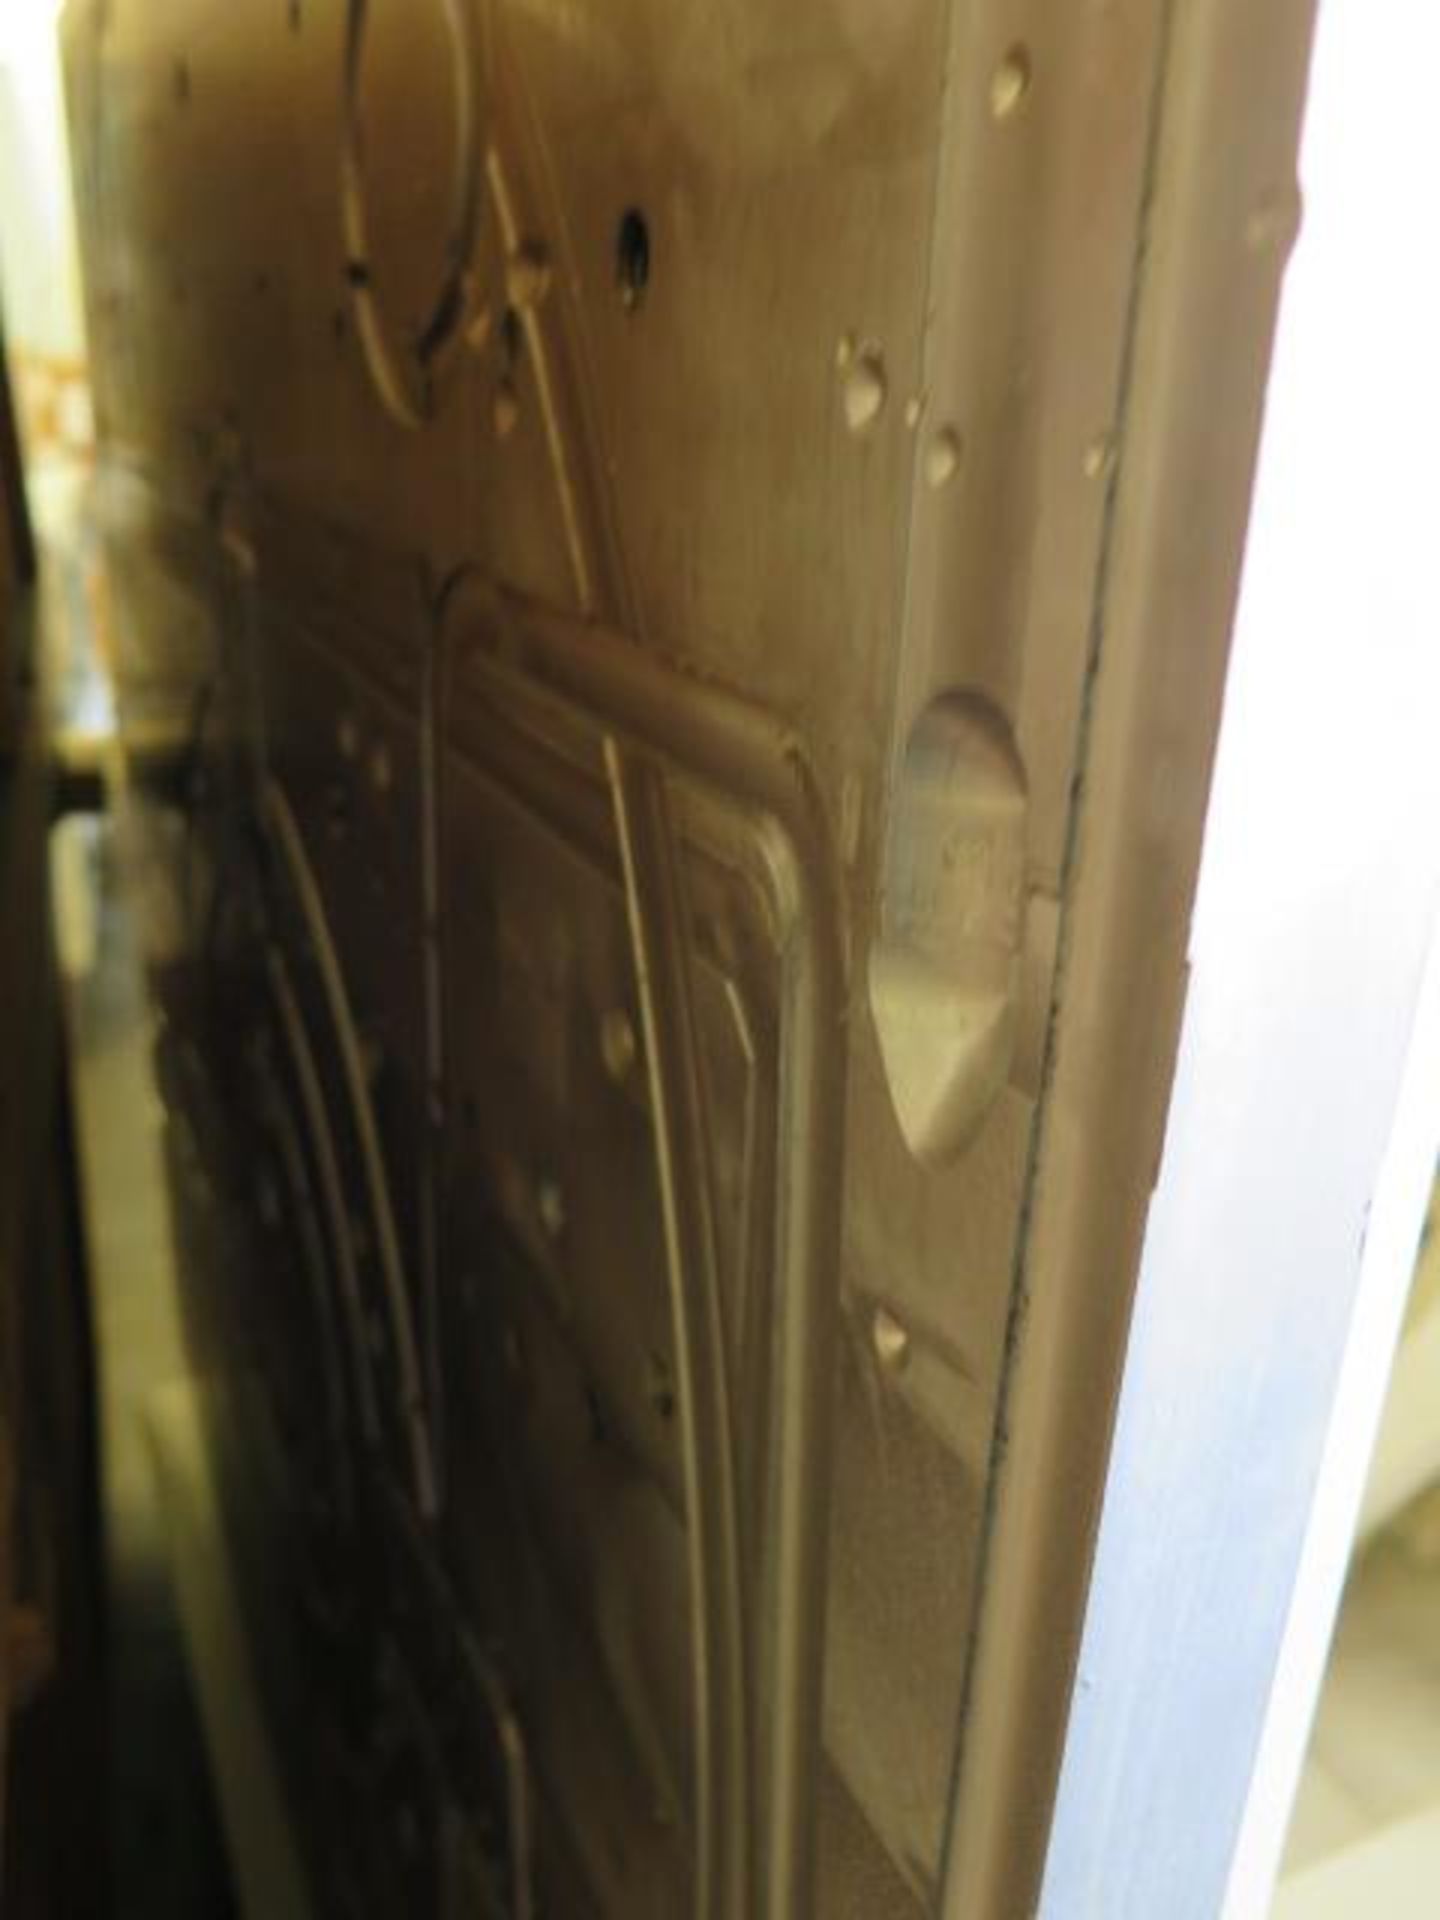 59" x 47" and 48" x 43" Aluminum-Faced Angle Fixture Plates (2) (SOLD AS-IS - NO WARRANTY) - Image 6 of 7